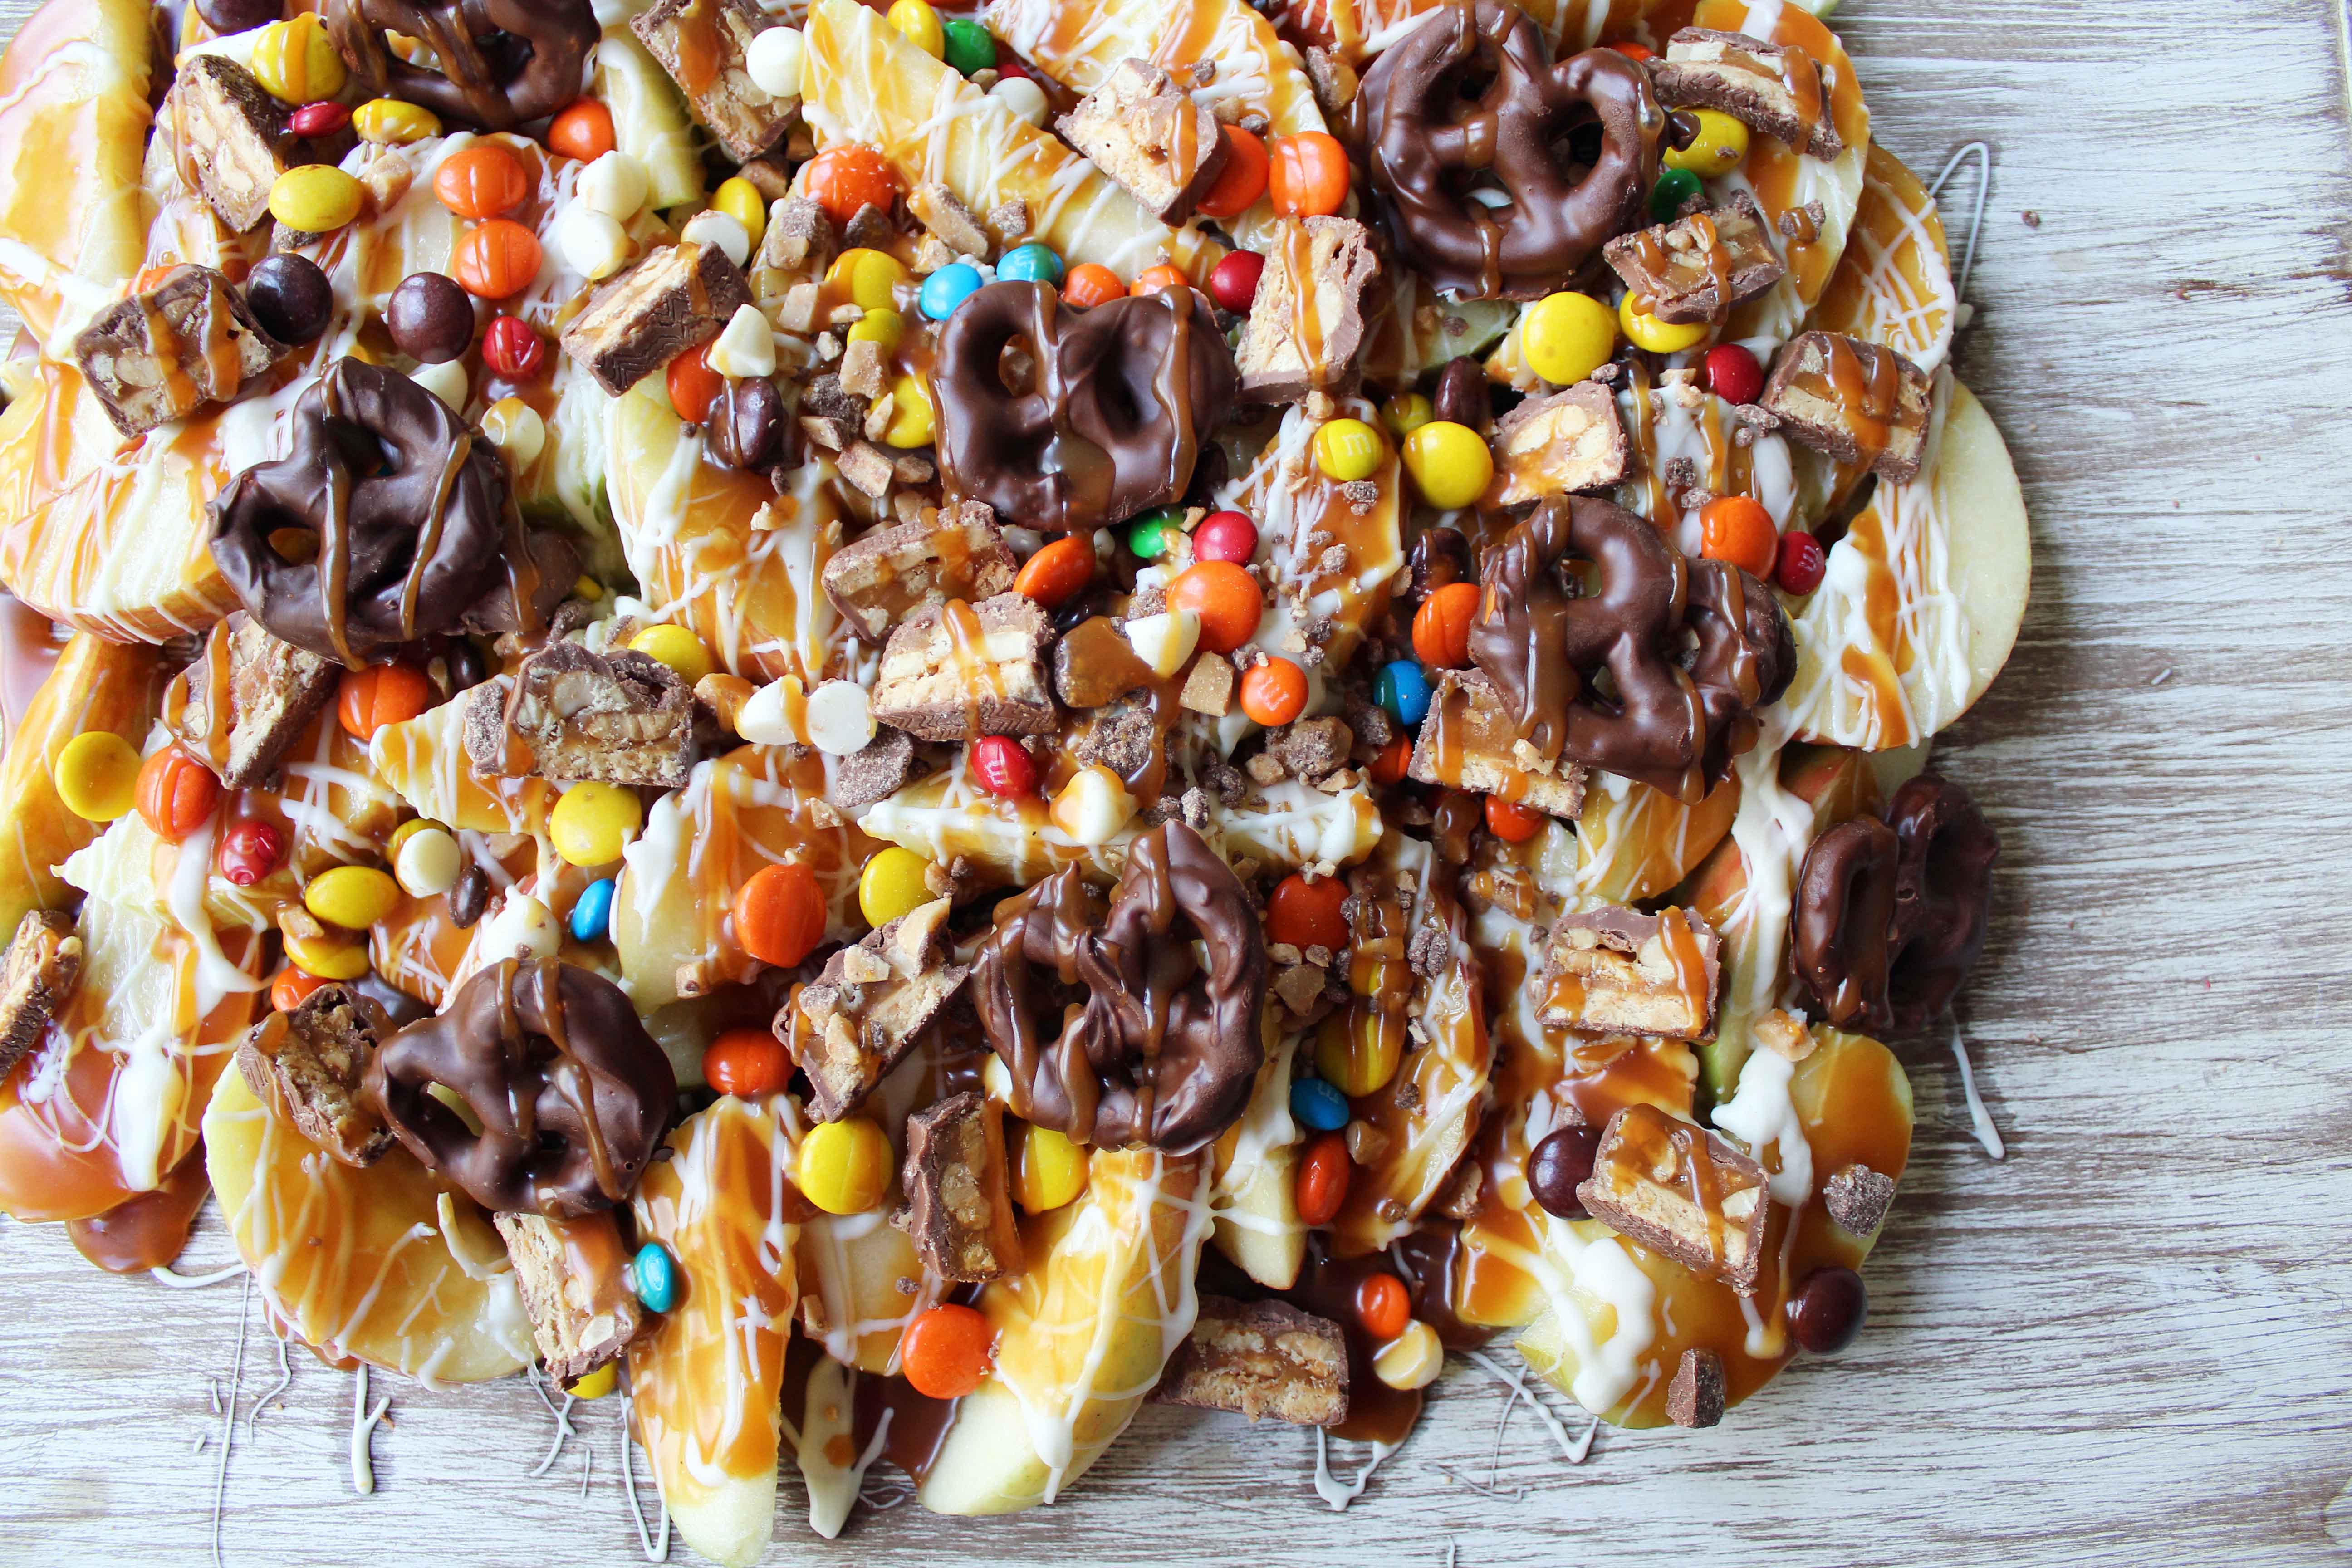 Candy Madness Caramel Apple Nachos by Modern Honey. Crisp Apples topped with Salted Caramel, White Chocolate, M &M's, Reeses Pieces, Heath Toffee Bits, Snickers, and Chocolate Covered Pretzels. These Caramel Apple Nachos are much easier than making caramel apples and will be a huge hit at your next party!